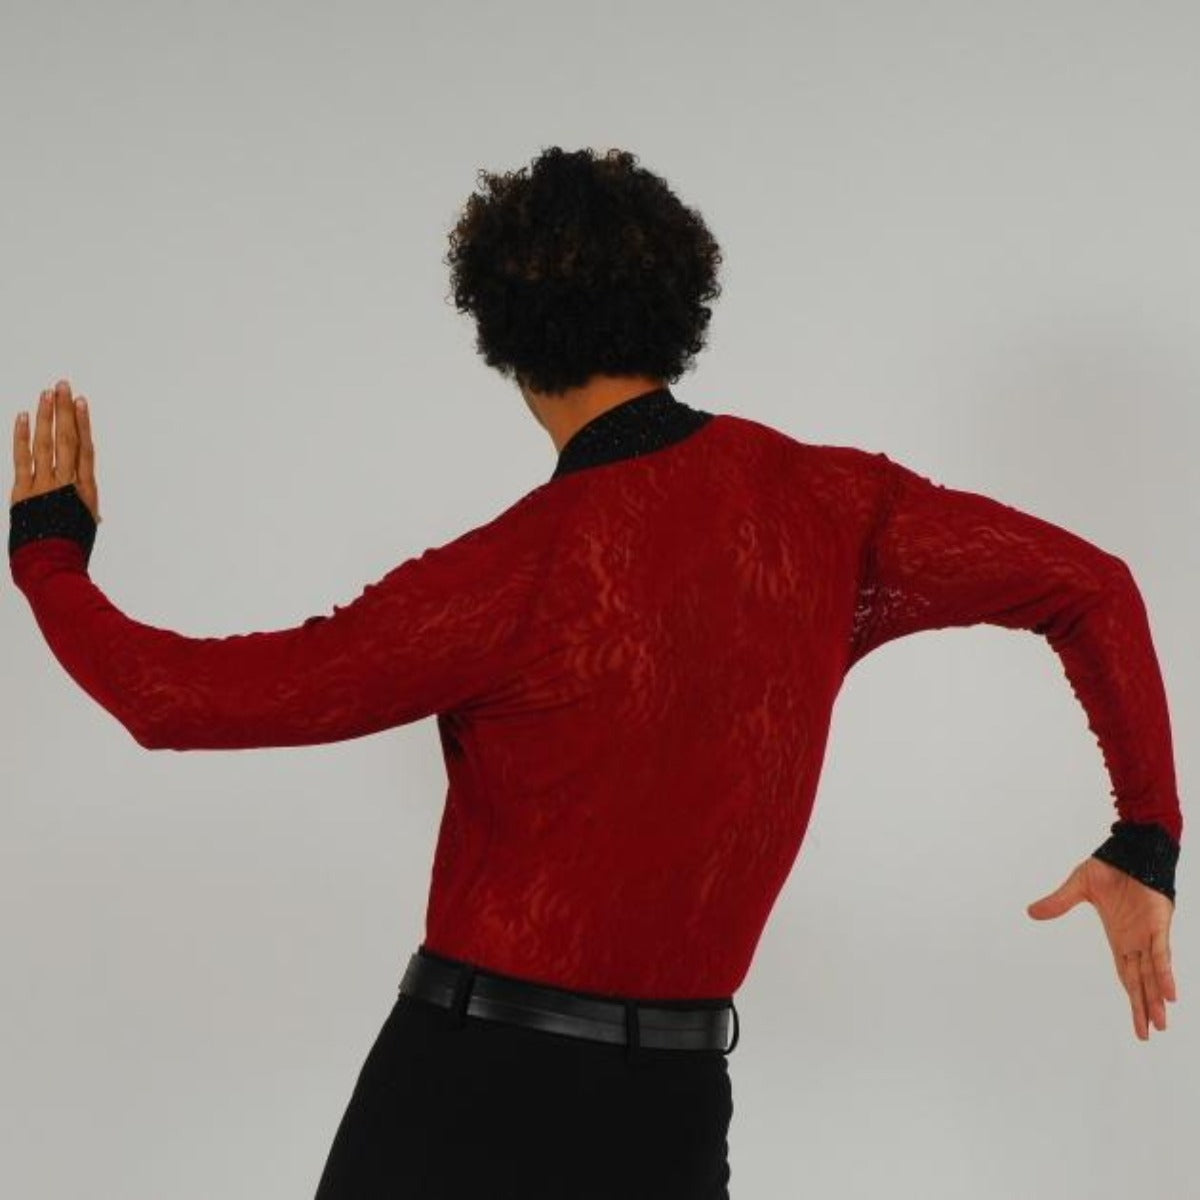 Crystal's Creations back view of men's deep red Latin shirt